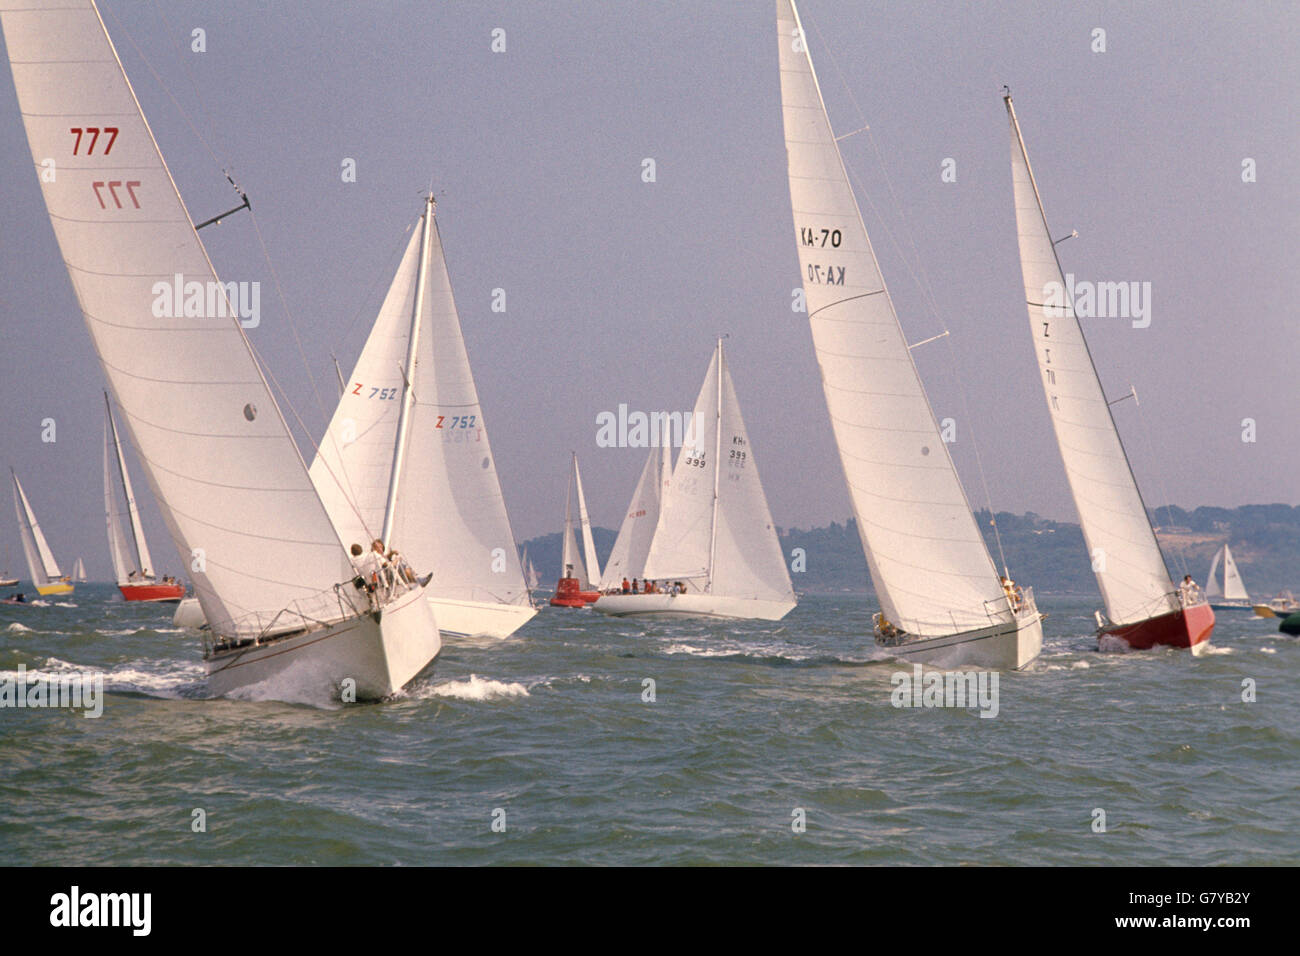 Sailing - Cowes Regatta Week. Yachts in the Solent during Cowes Regatta Week. Stock Photo